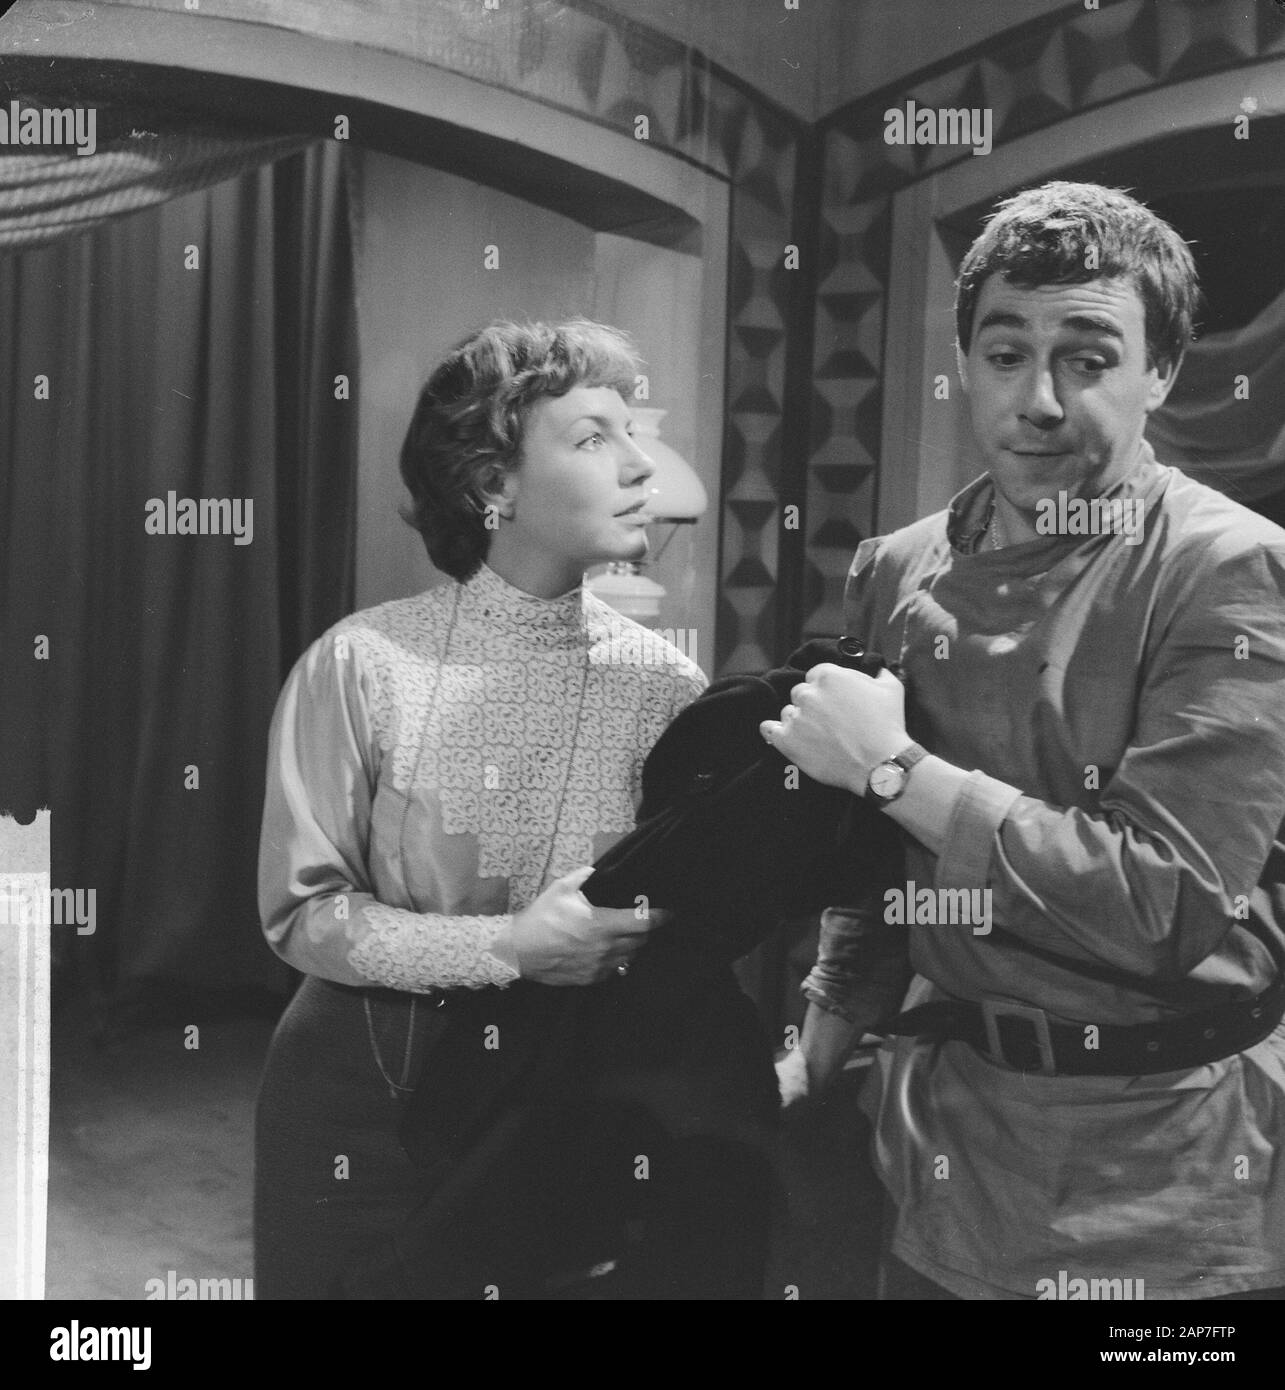 AVRO Television. The Student Raskolnikoff based on a story of Dostoevsky.. Coen Flink as the student. Annet Nieuwenhuyzen as Sonja Date: 11 October 1961 Keywords: actors, television dramas Personal name: Flink, Coen, Nieuwenhuyzen, Annet Stock Photo